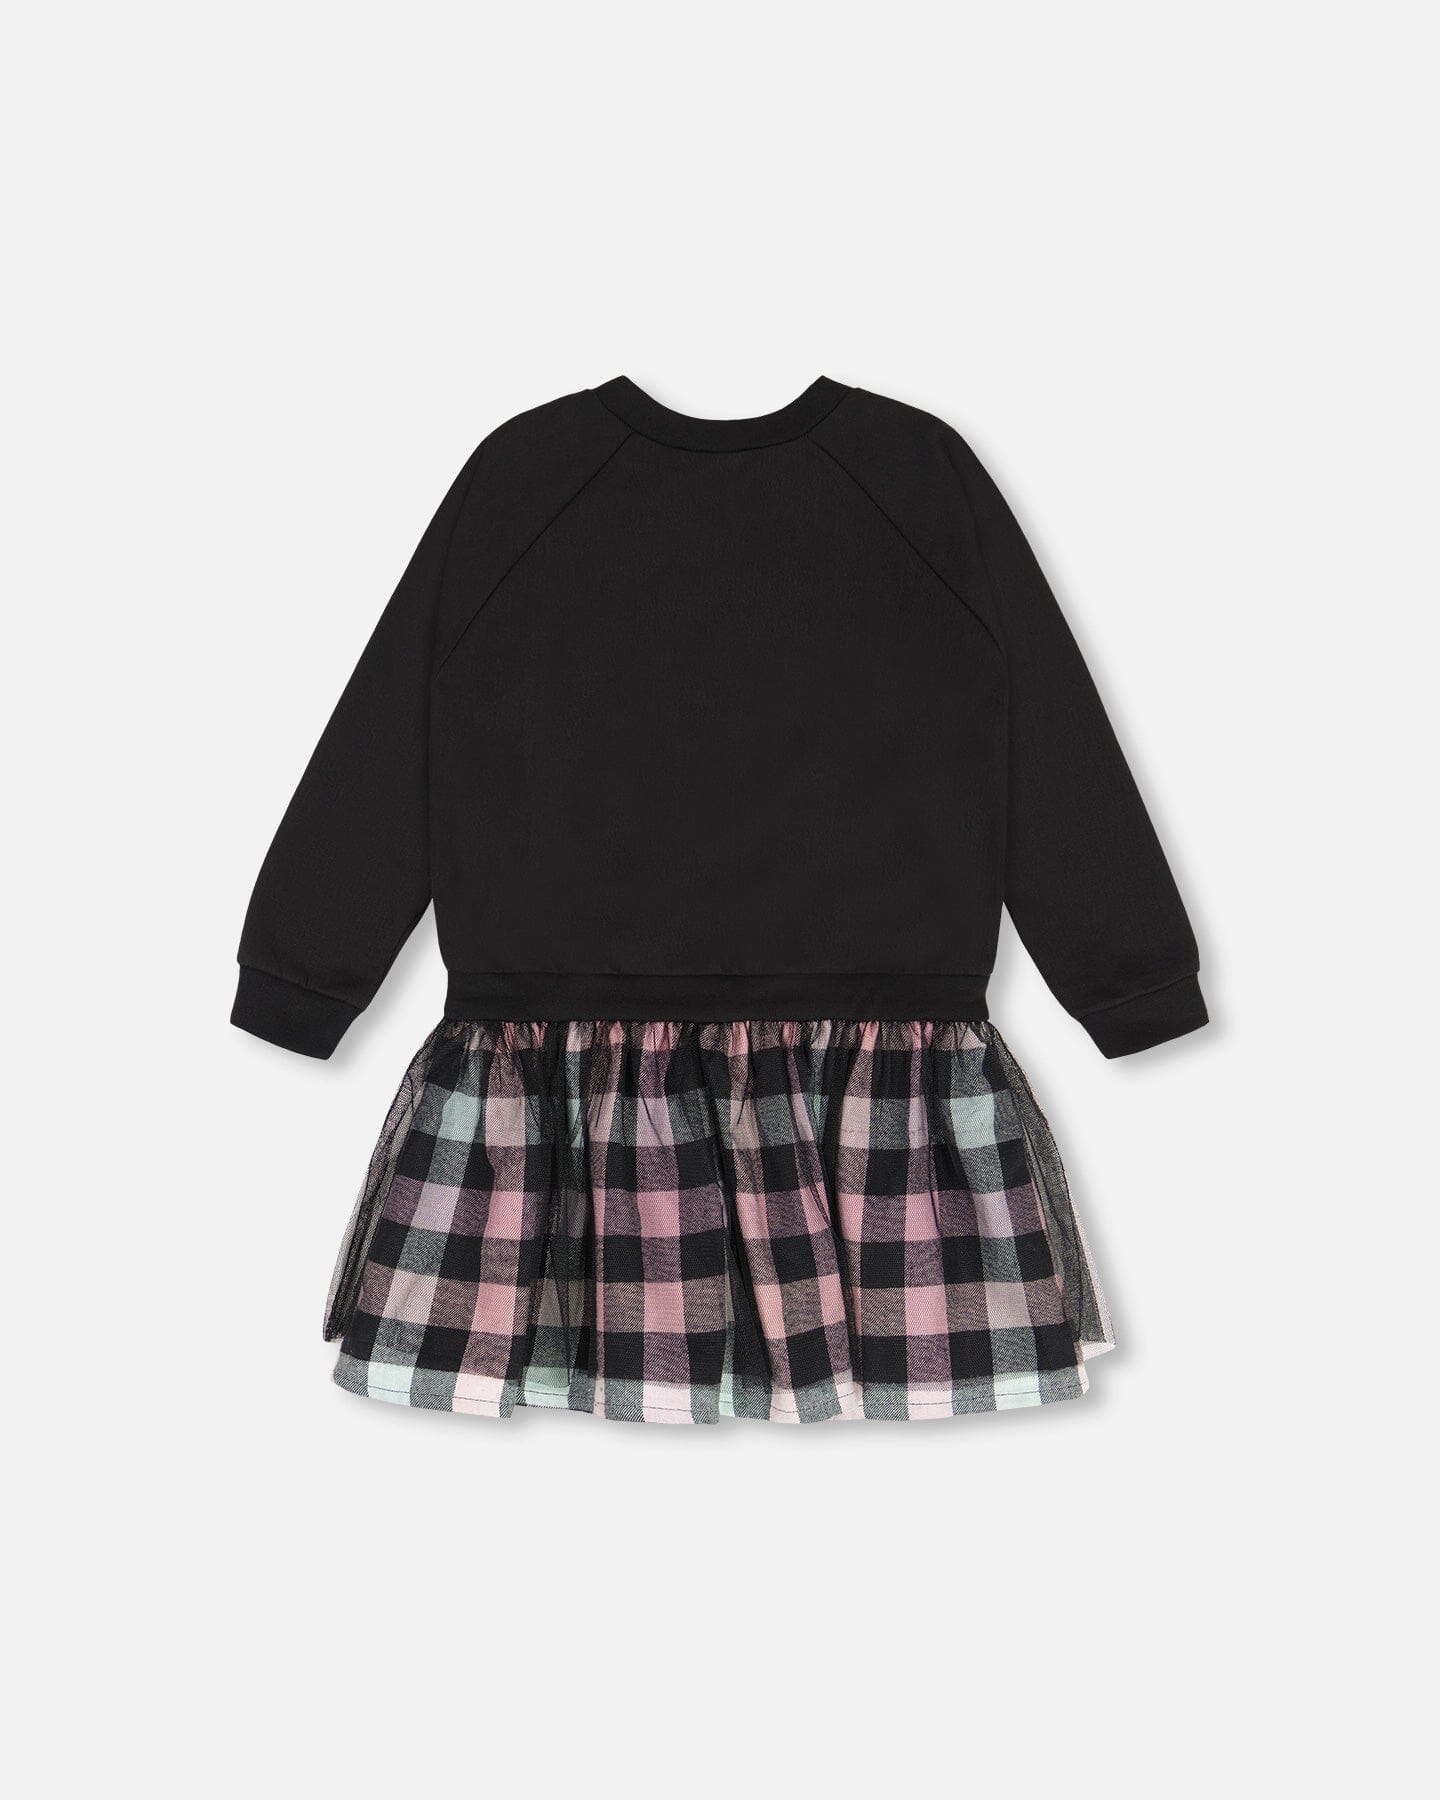 Bi-Material Sweatshirt Dress With Tulle Skirt Black And Colorful Plaid - F20L94_999